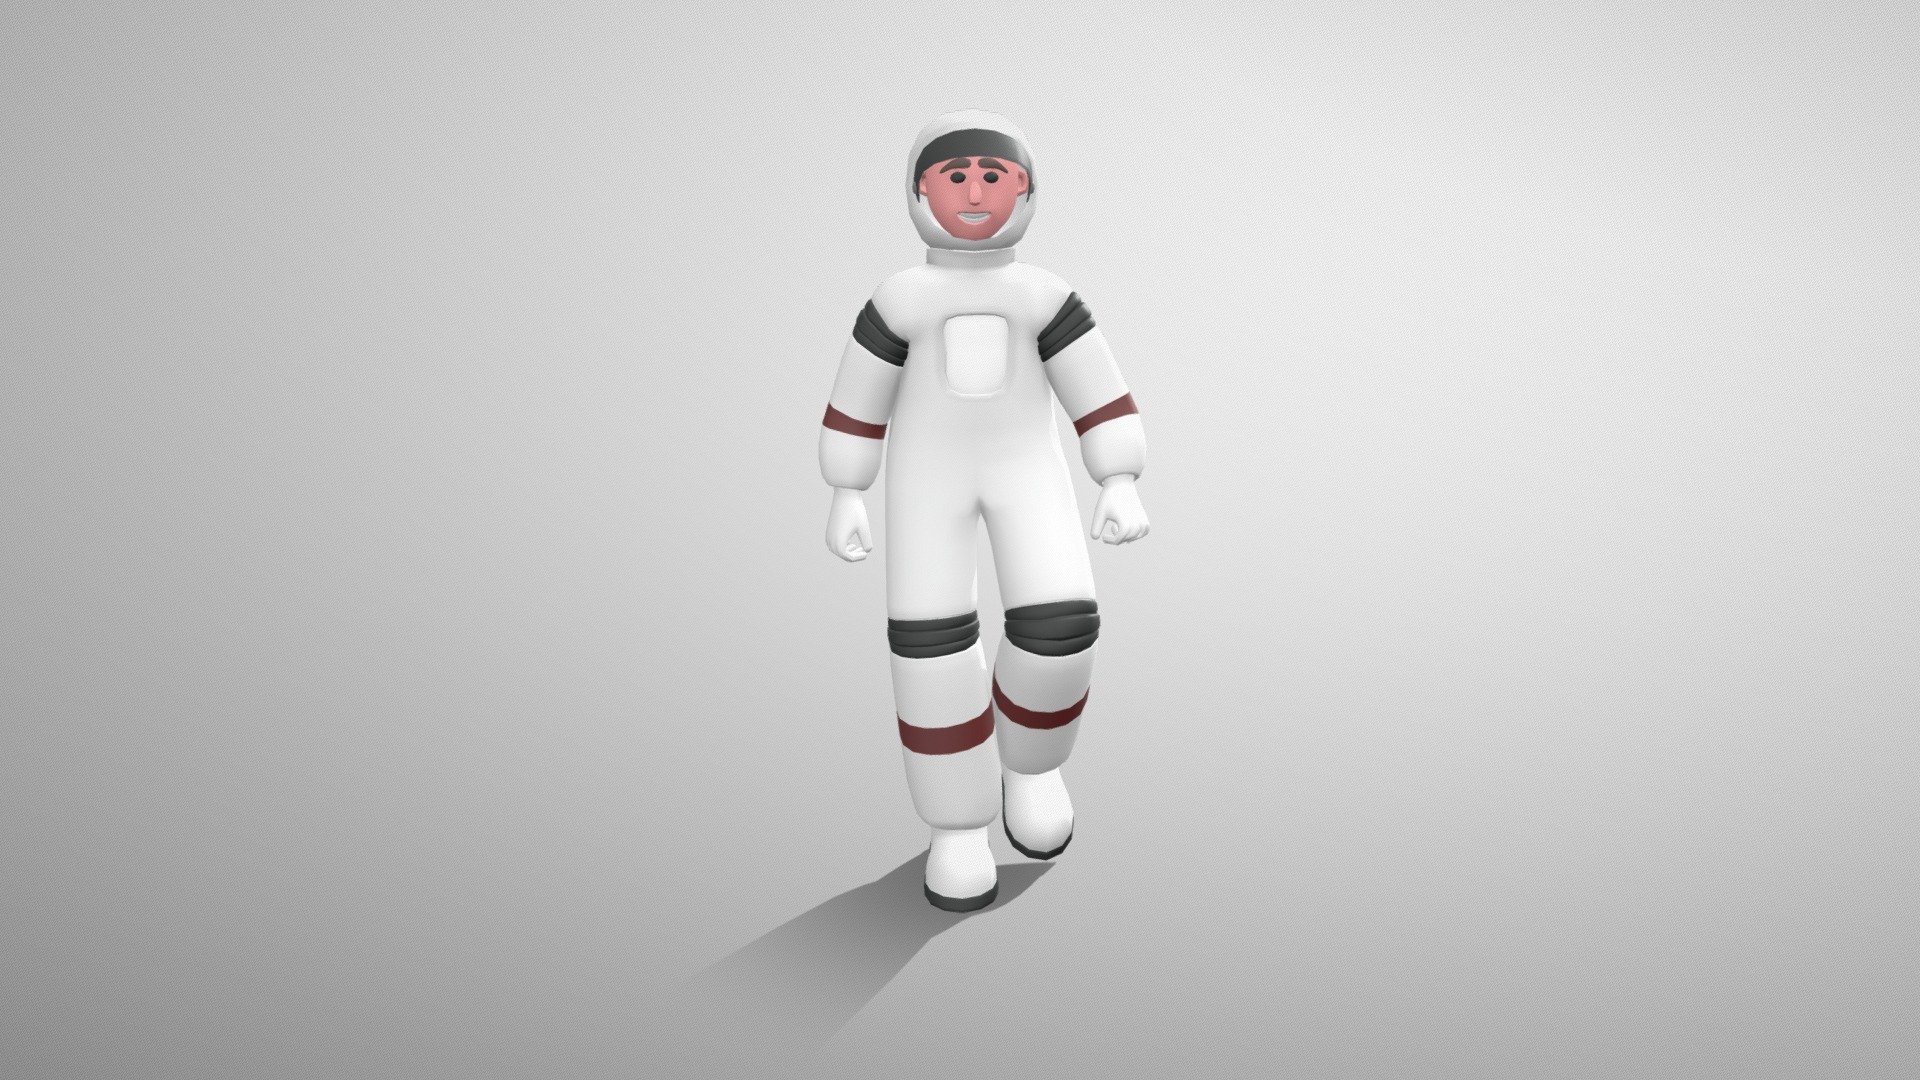 Stylized Man Astronaut is the part of the big characters bundle. These stylized 3D characters might be useful for motion graphics design, cartoon production, game development, illustrations and many other industries.

The 3D model is rigged and ready to use with Mixamo. You can apply any Mixamo animation in one click . We also added 12 widely used animations.

The character model is well optimized and subdivision ready. You can choose any smoothing option you want, according to your project.

The model has only a single texture. It is useful for mobile game development and it's easy to change colors of clothes, skin etc.

If you have any questions or suggestions on improving our product, feel free to send a message to mail@dreamlab.net.ua - Stylized Man Astronaut - Mixamo Rigged Character - Buy Royalty Free 3D model by Dream Lab (@dreamlabanim) 3d model